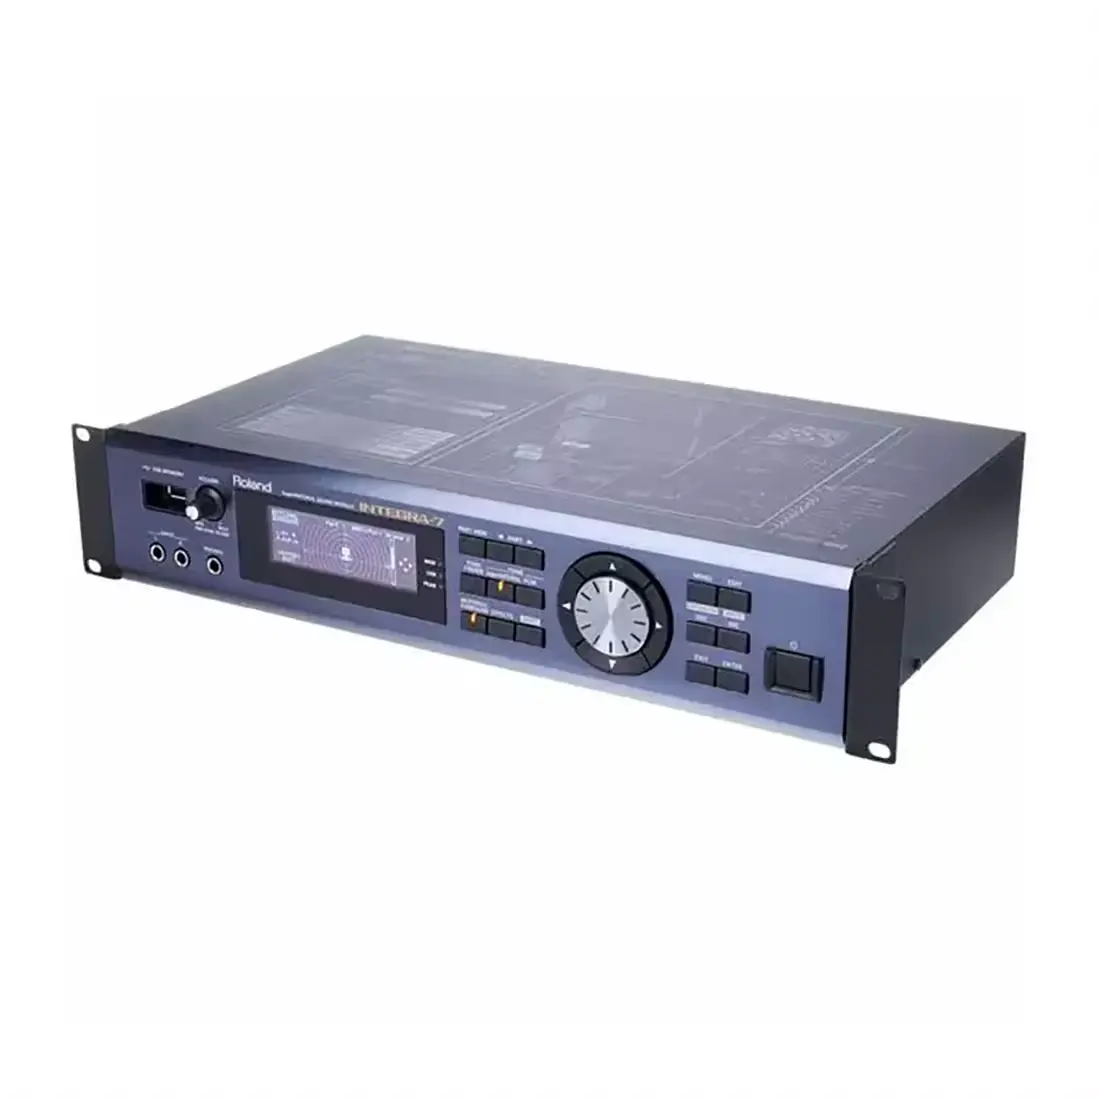 "Roland INTEGRA-7 SuperNATURAL Sound Module - IN STOCK | Professional Music Production Equipment"